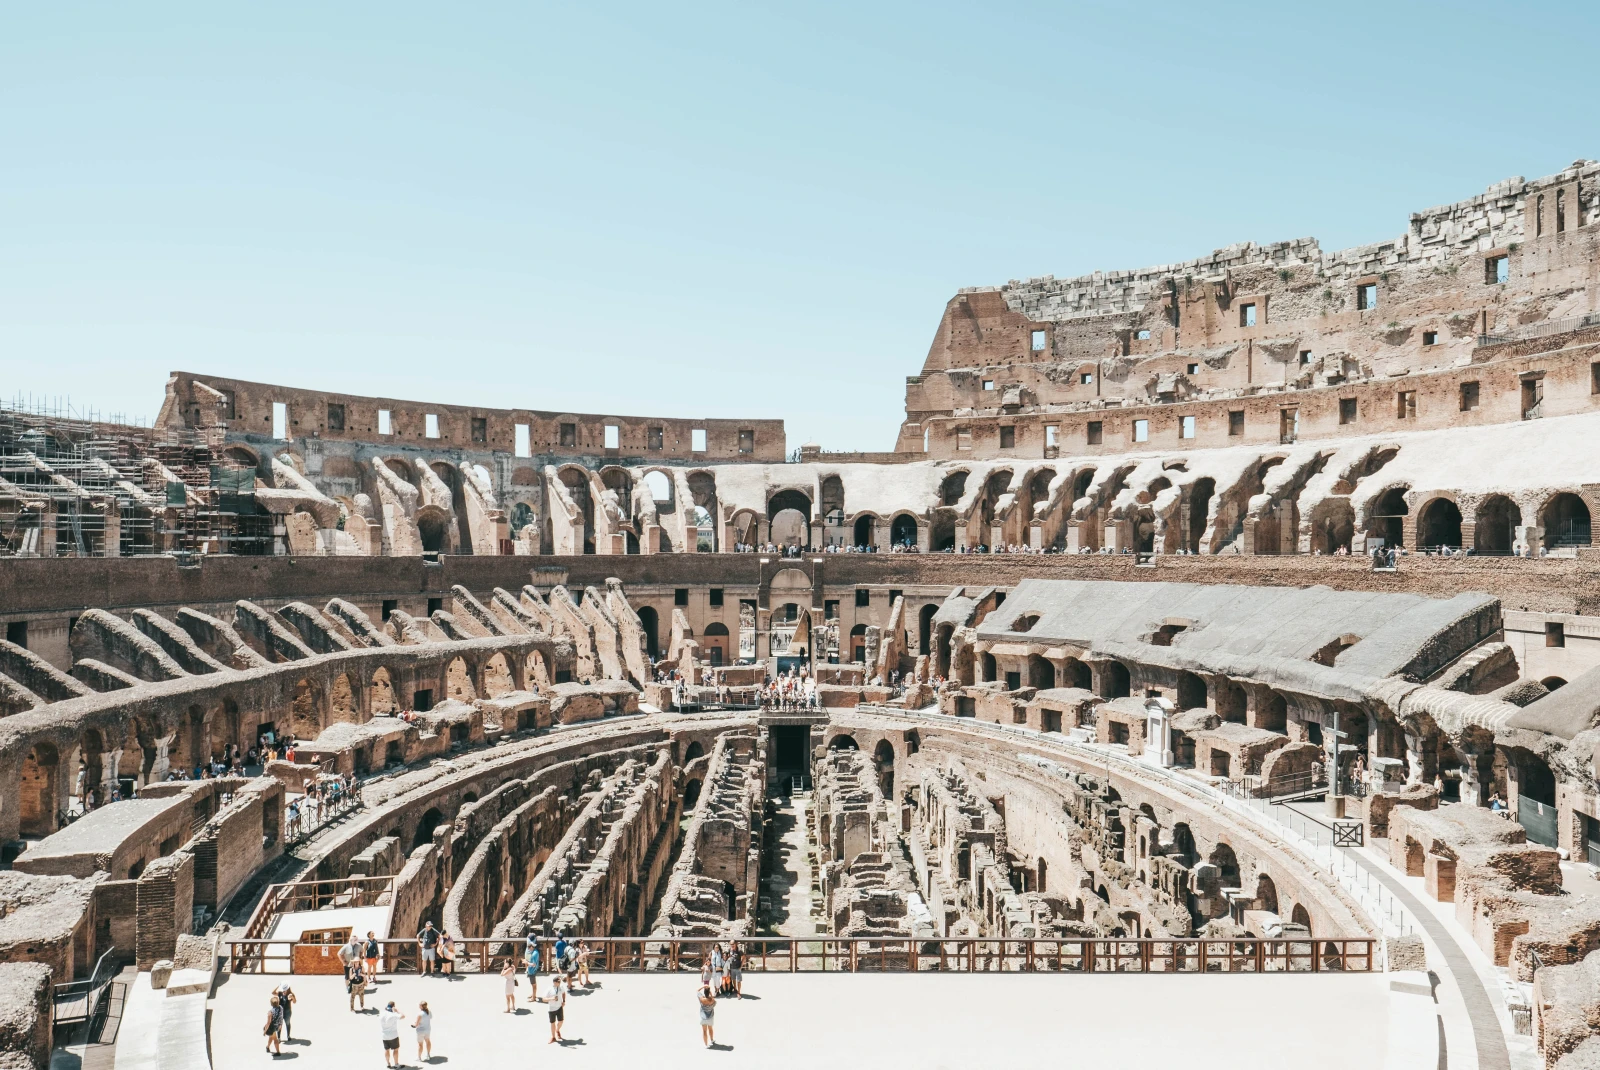 view inside colosseum during daytime